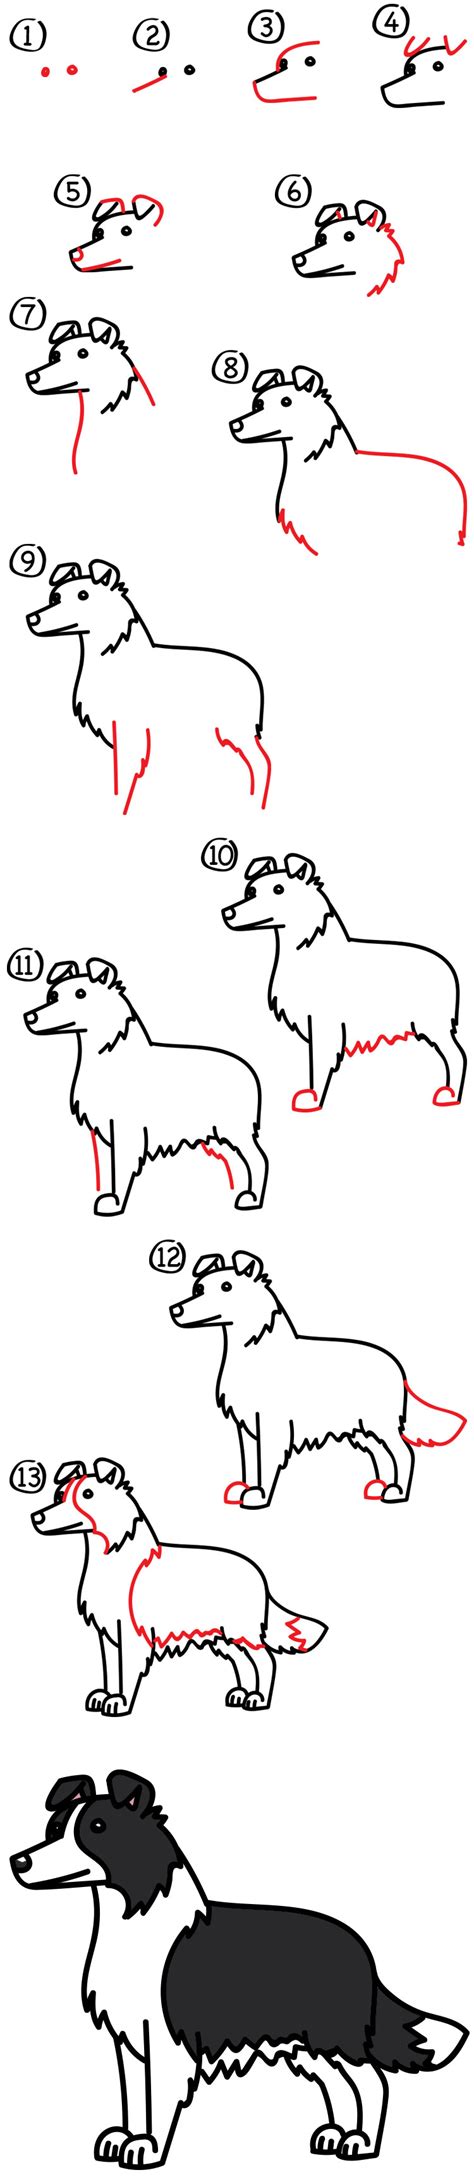 How to draw a Dog easy step by step The Smart Wander